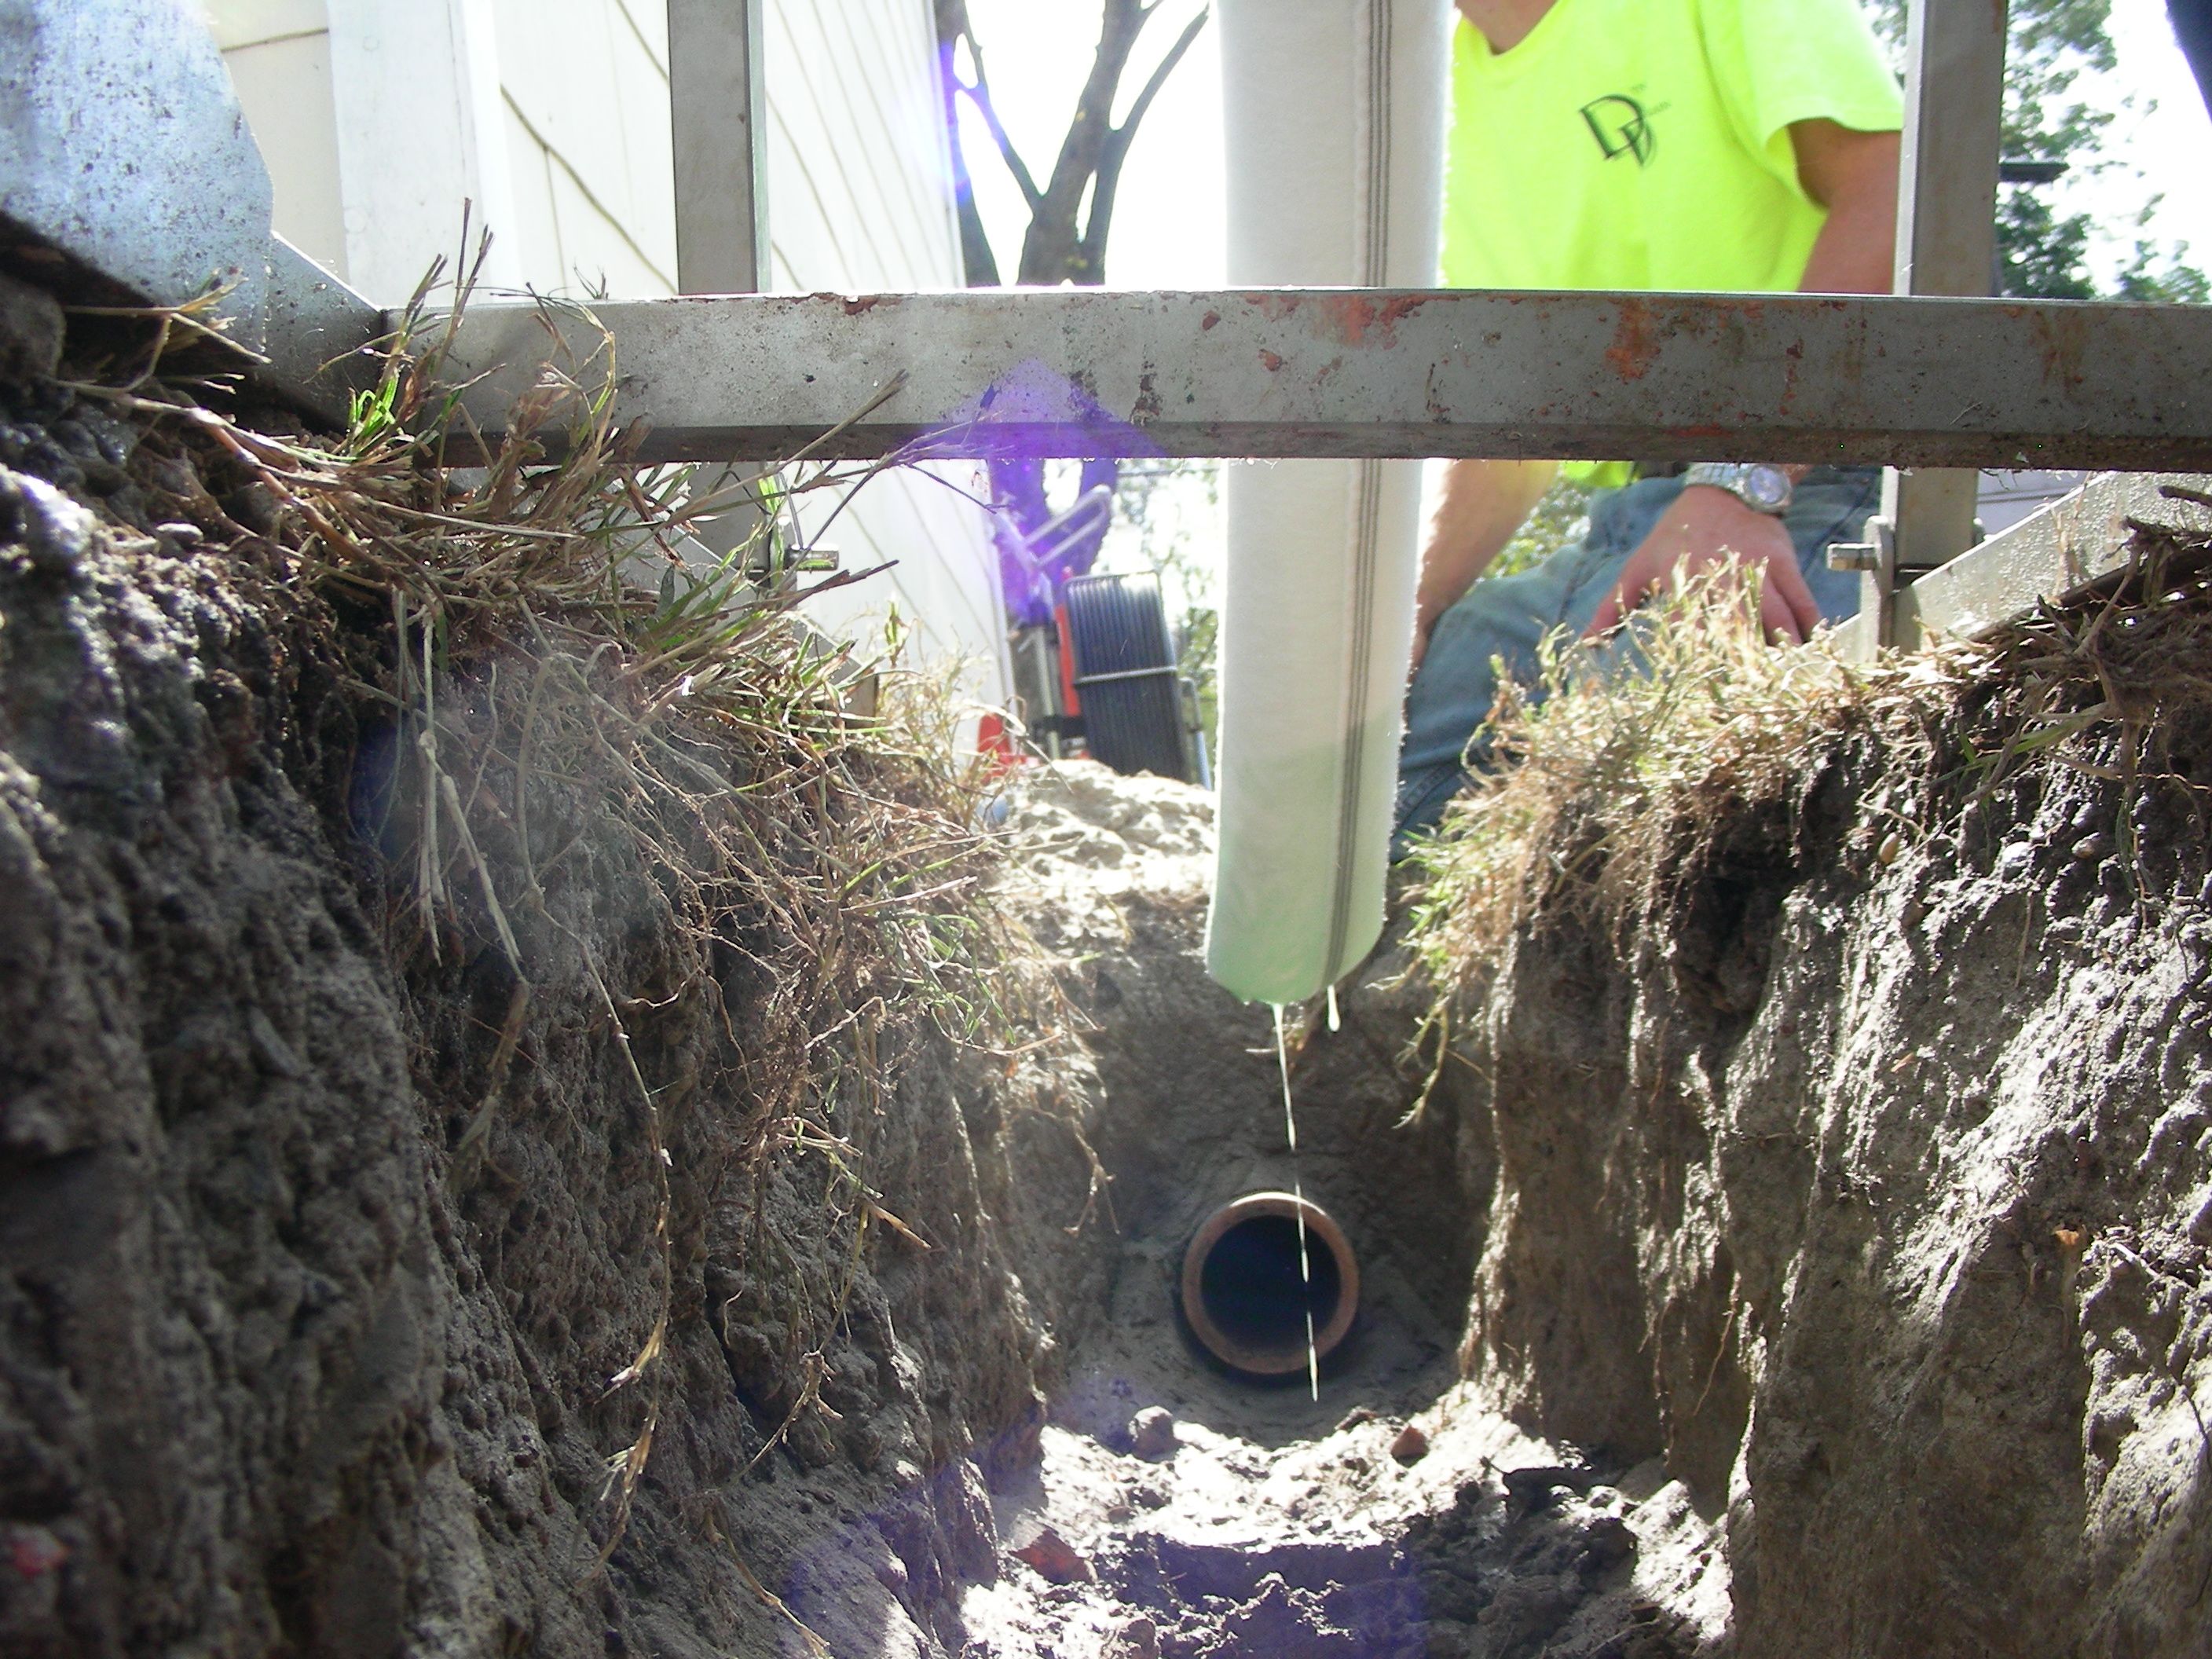 Trenchless liner being inverted into the access point which leads to the city's main